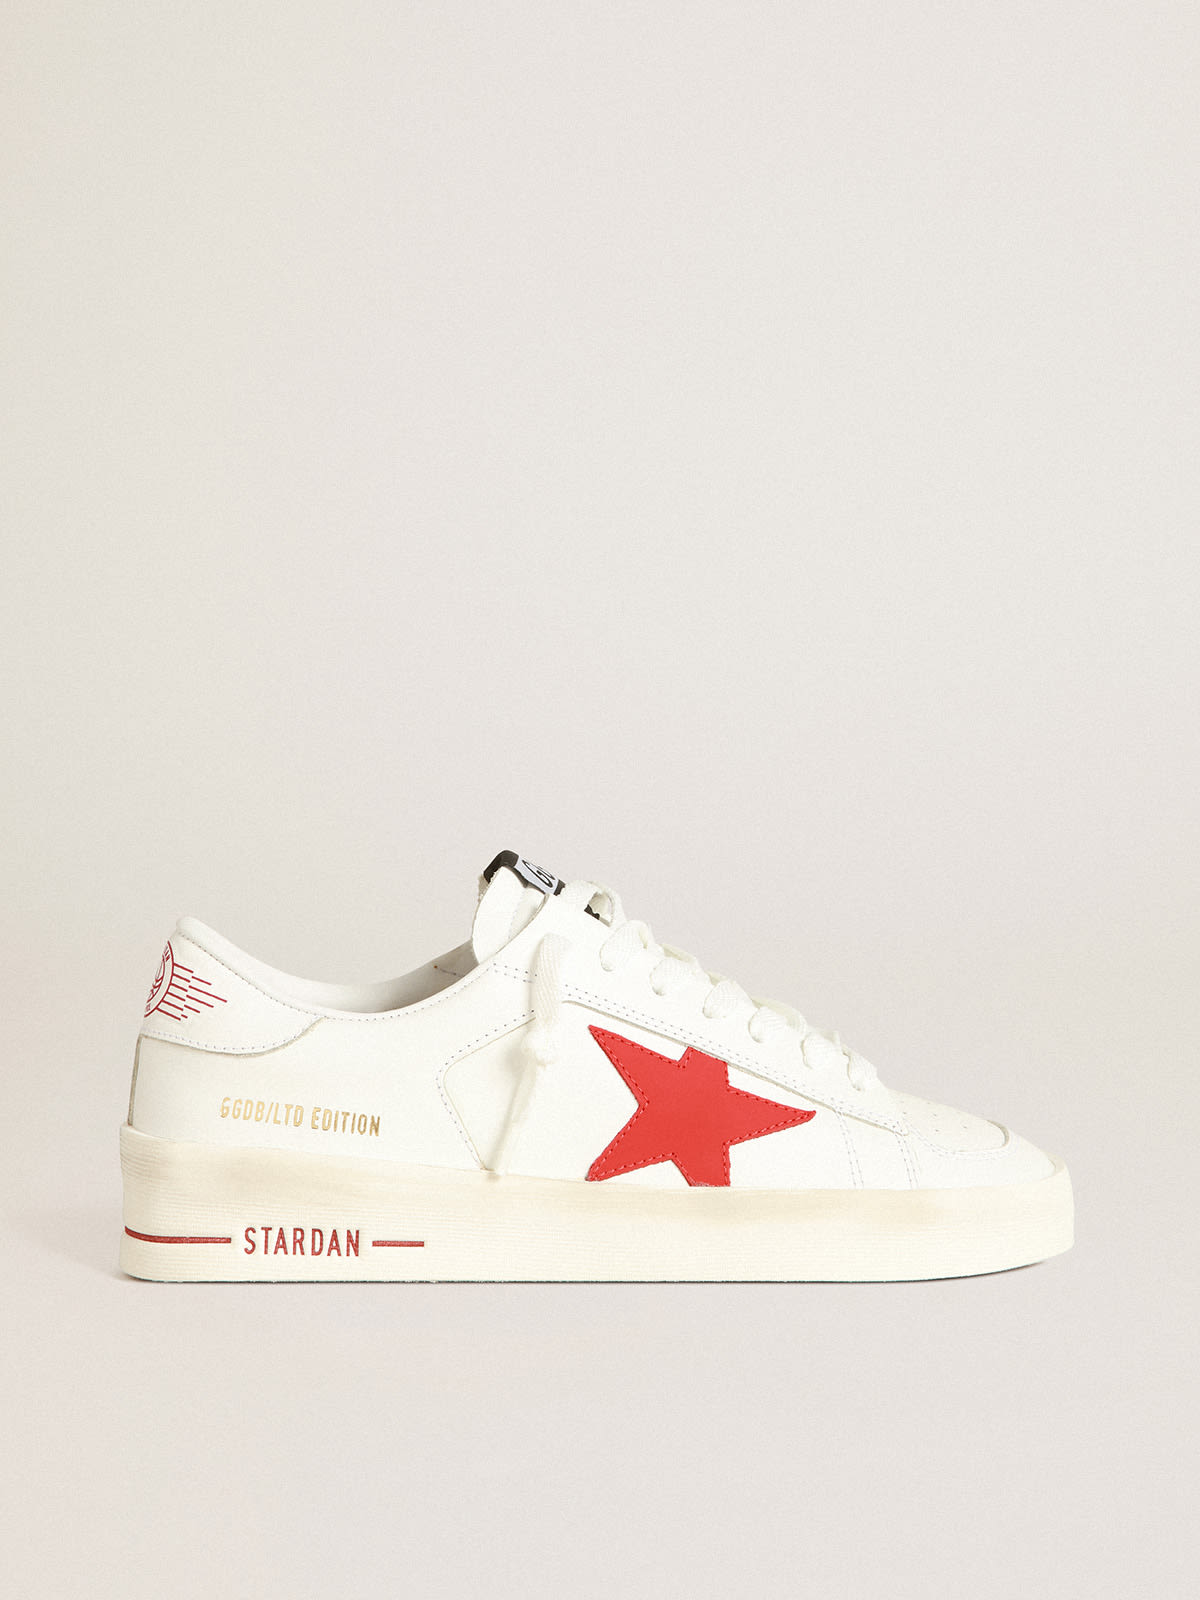 Stardan LTD sneakers with red rubber-effect leather star and white leather  heel tab | Golden Goose